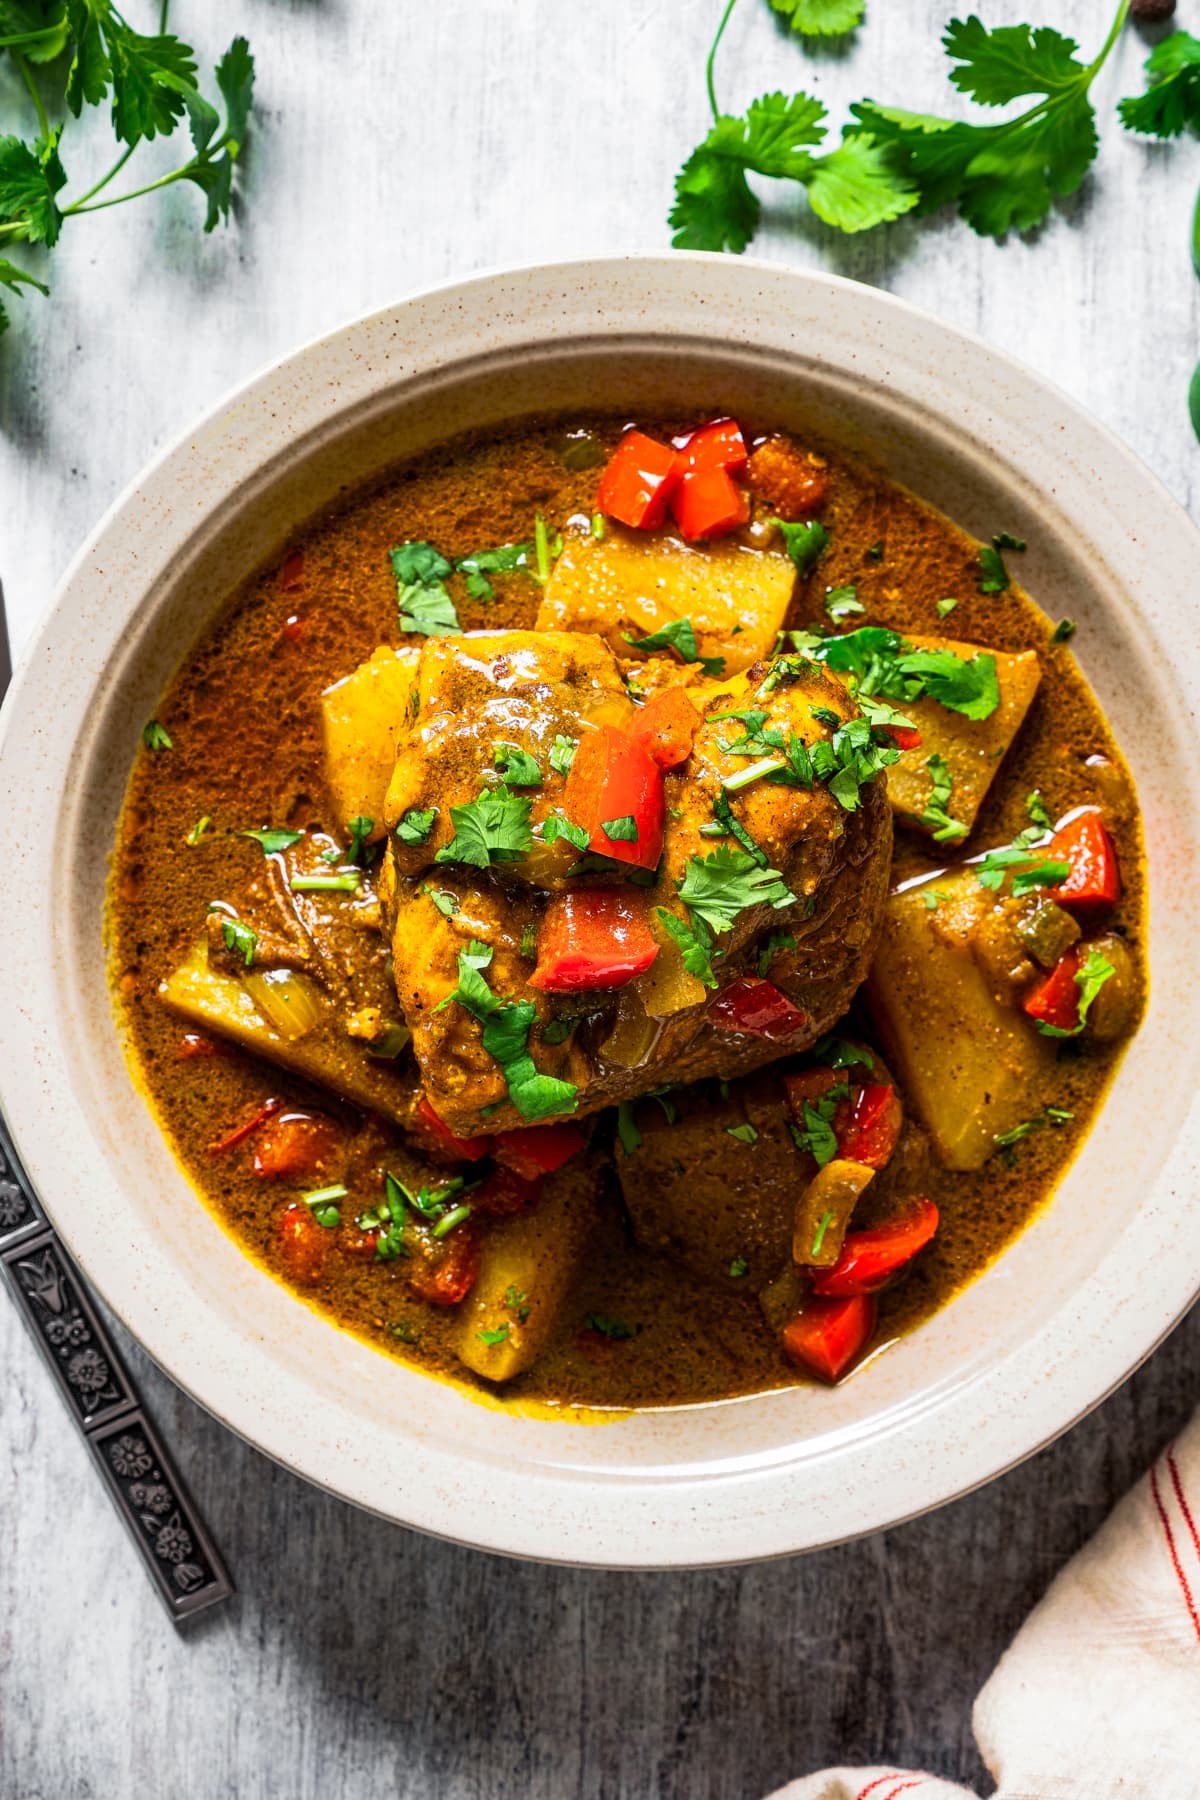 Jamaican curry chicken in a bowl.